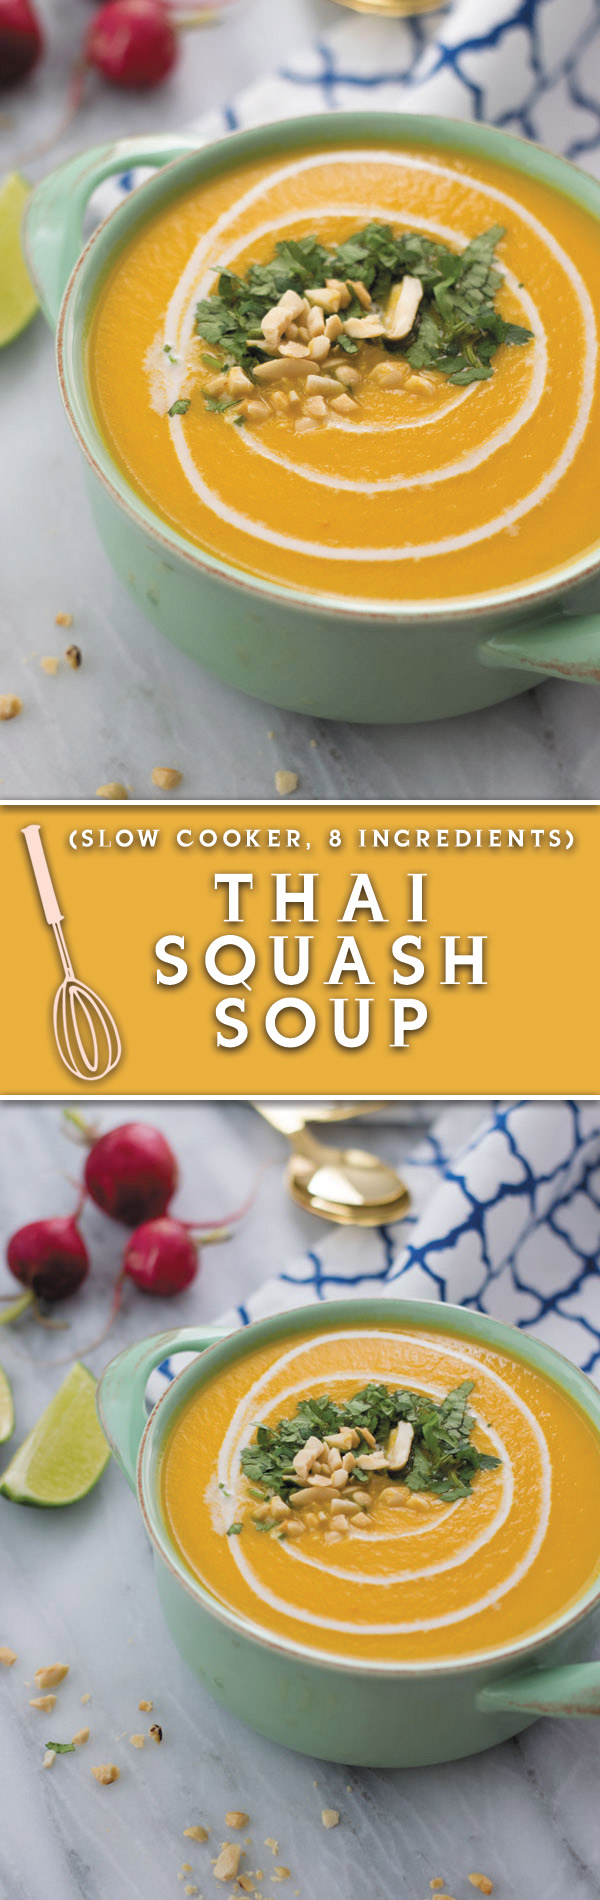 Thai Squash Soup - a delicious comfort soup made in slow cooker, made with just 8 ingredients. Healthy comforting soup!